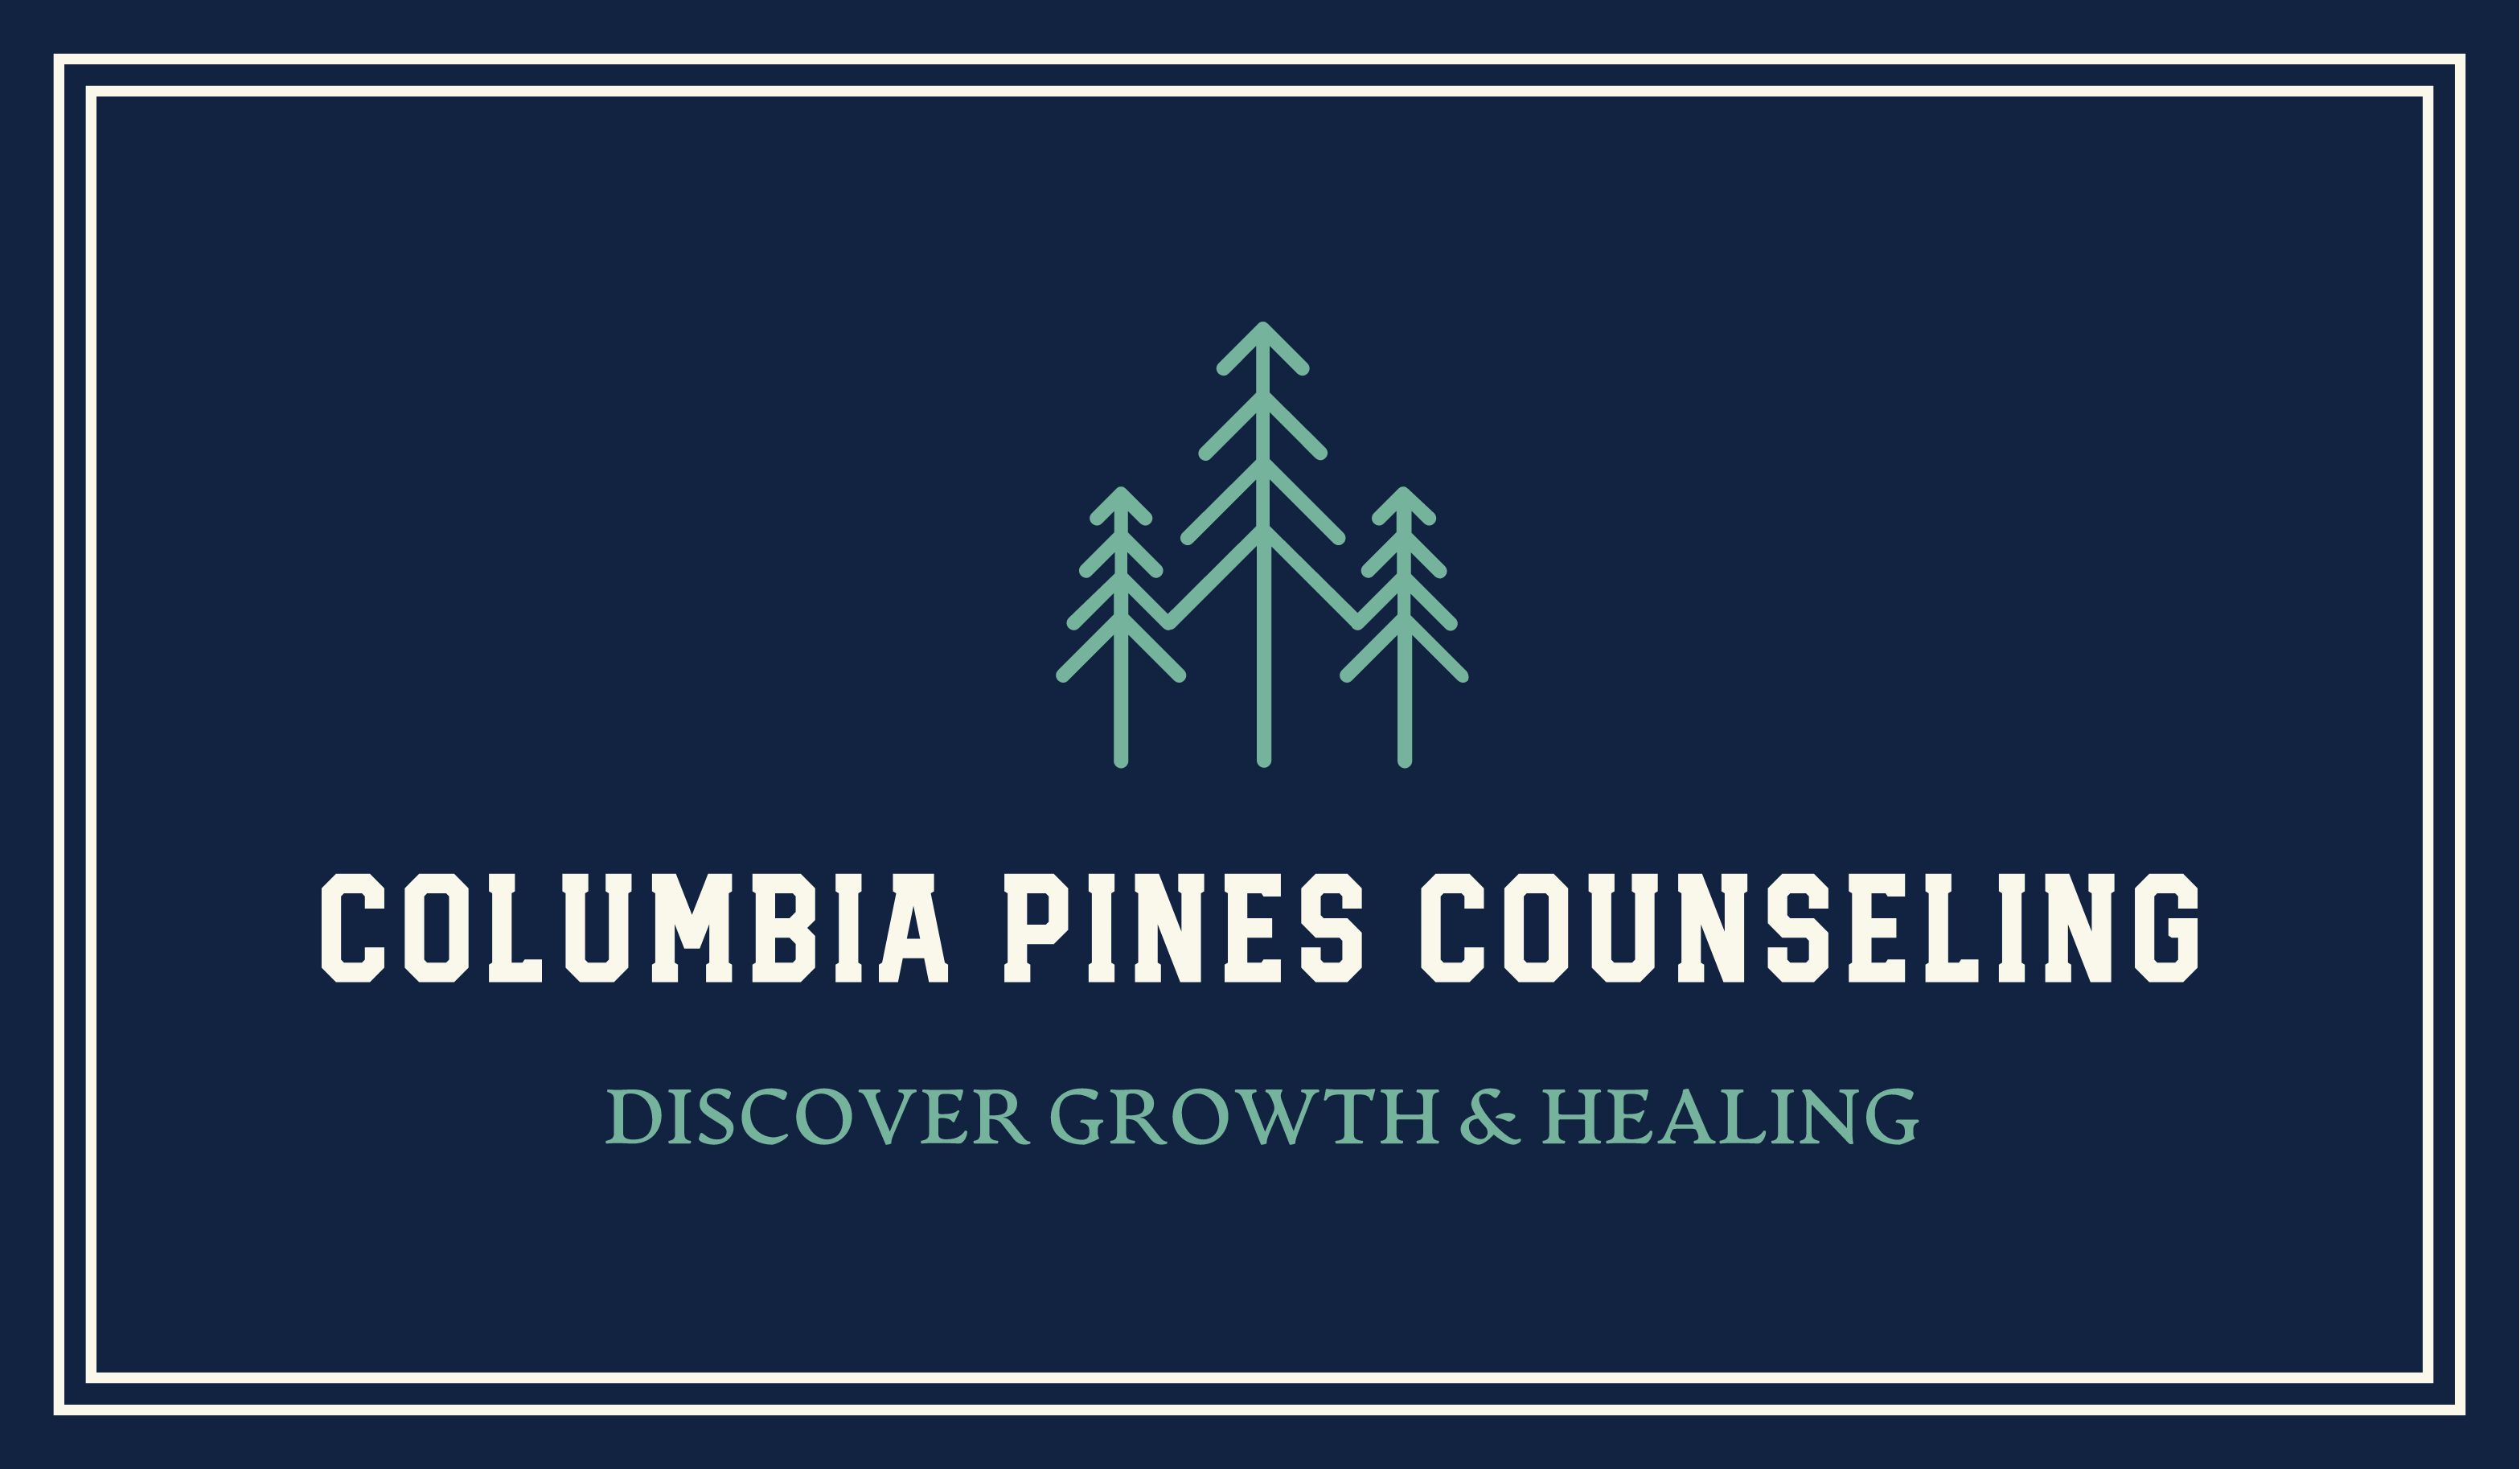 Columbia Pines Counseling